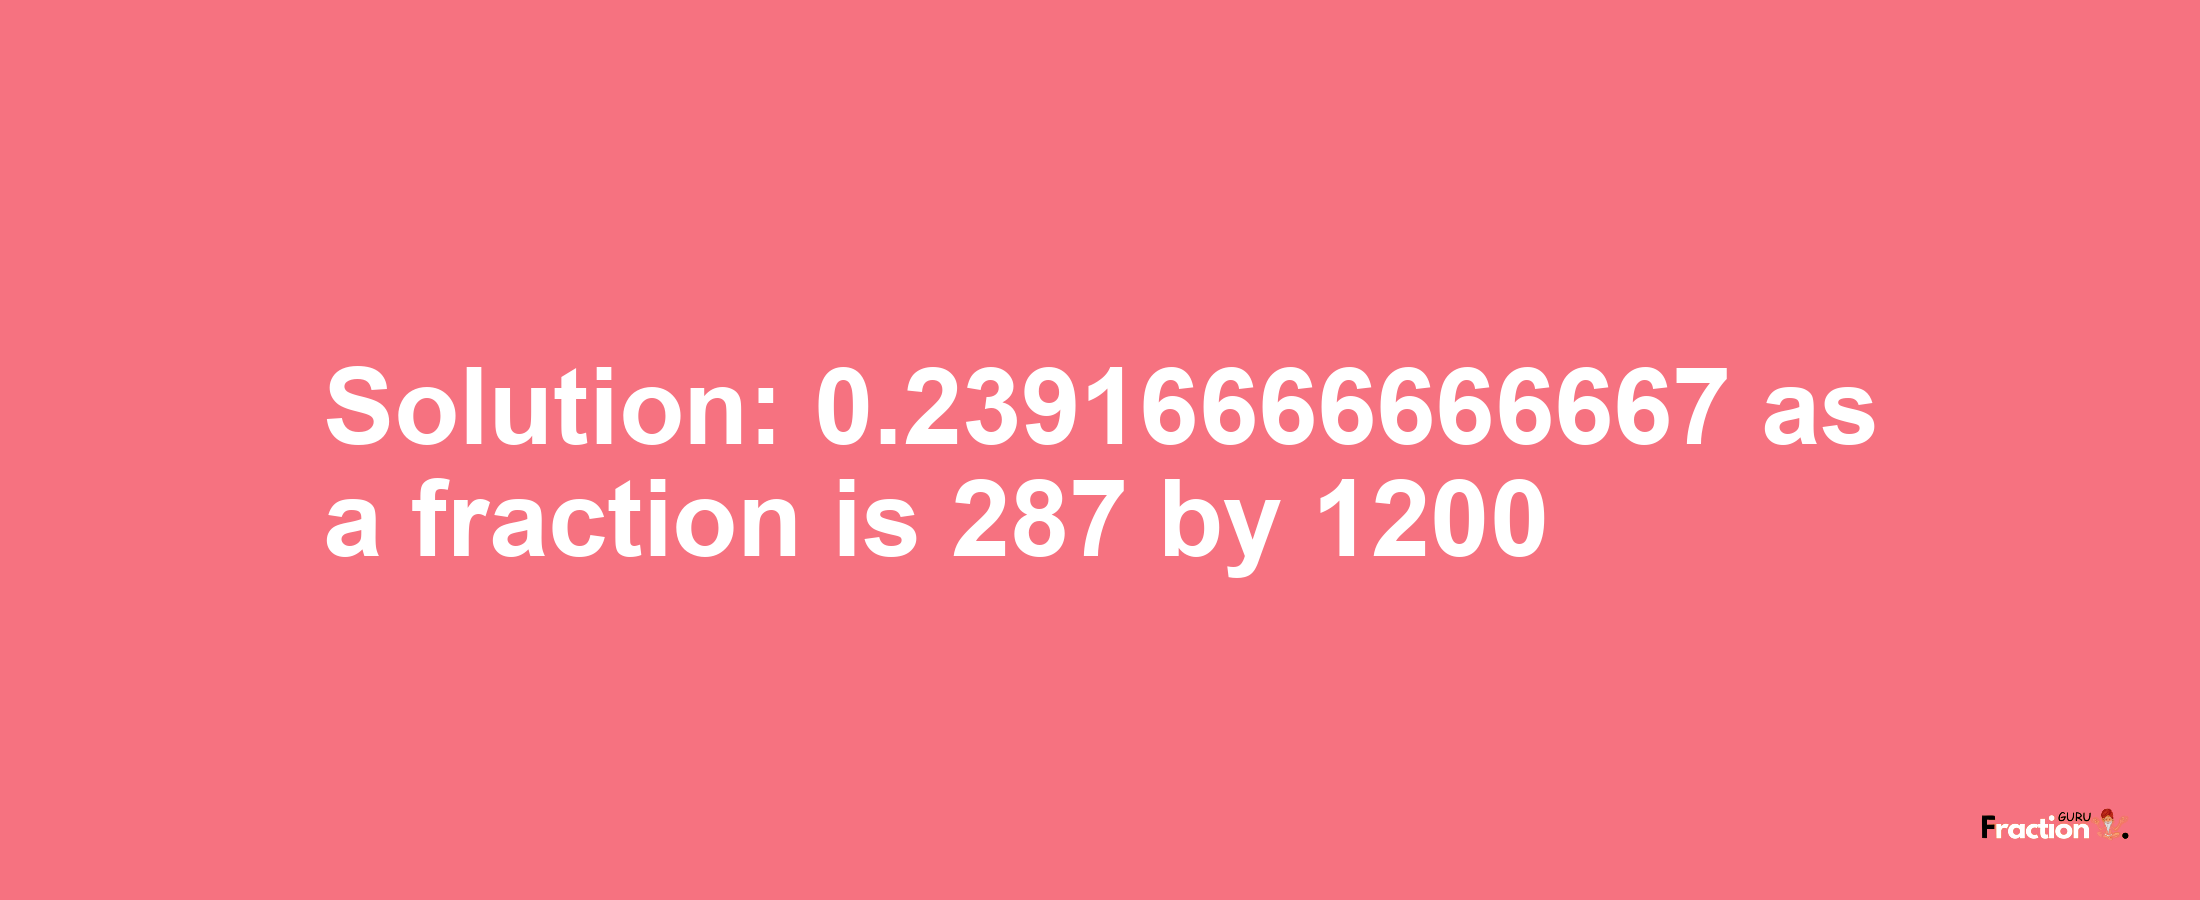 Solution:0.23916666666667 as a fraction is 287/1200